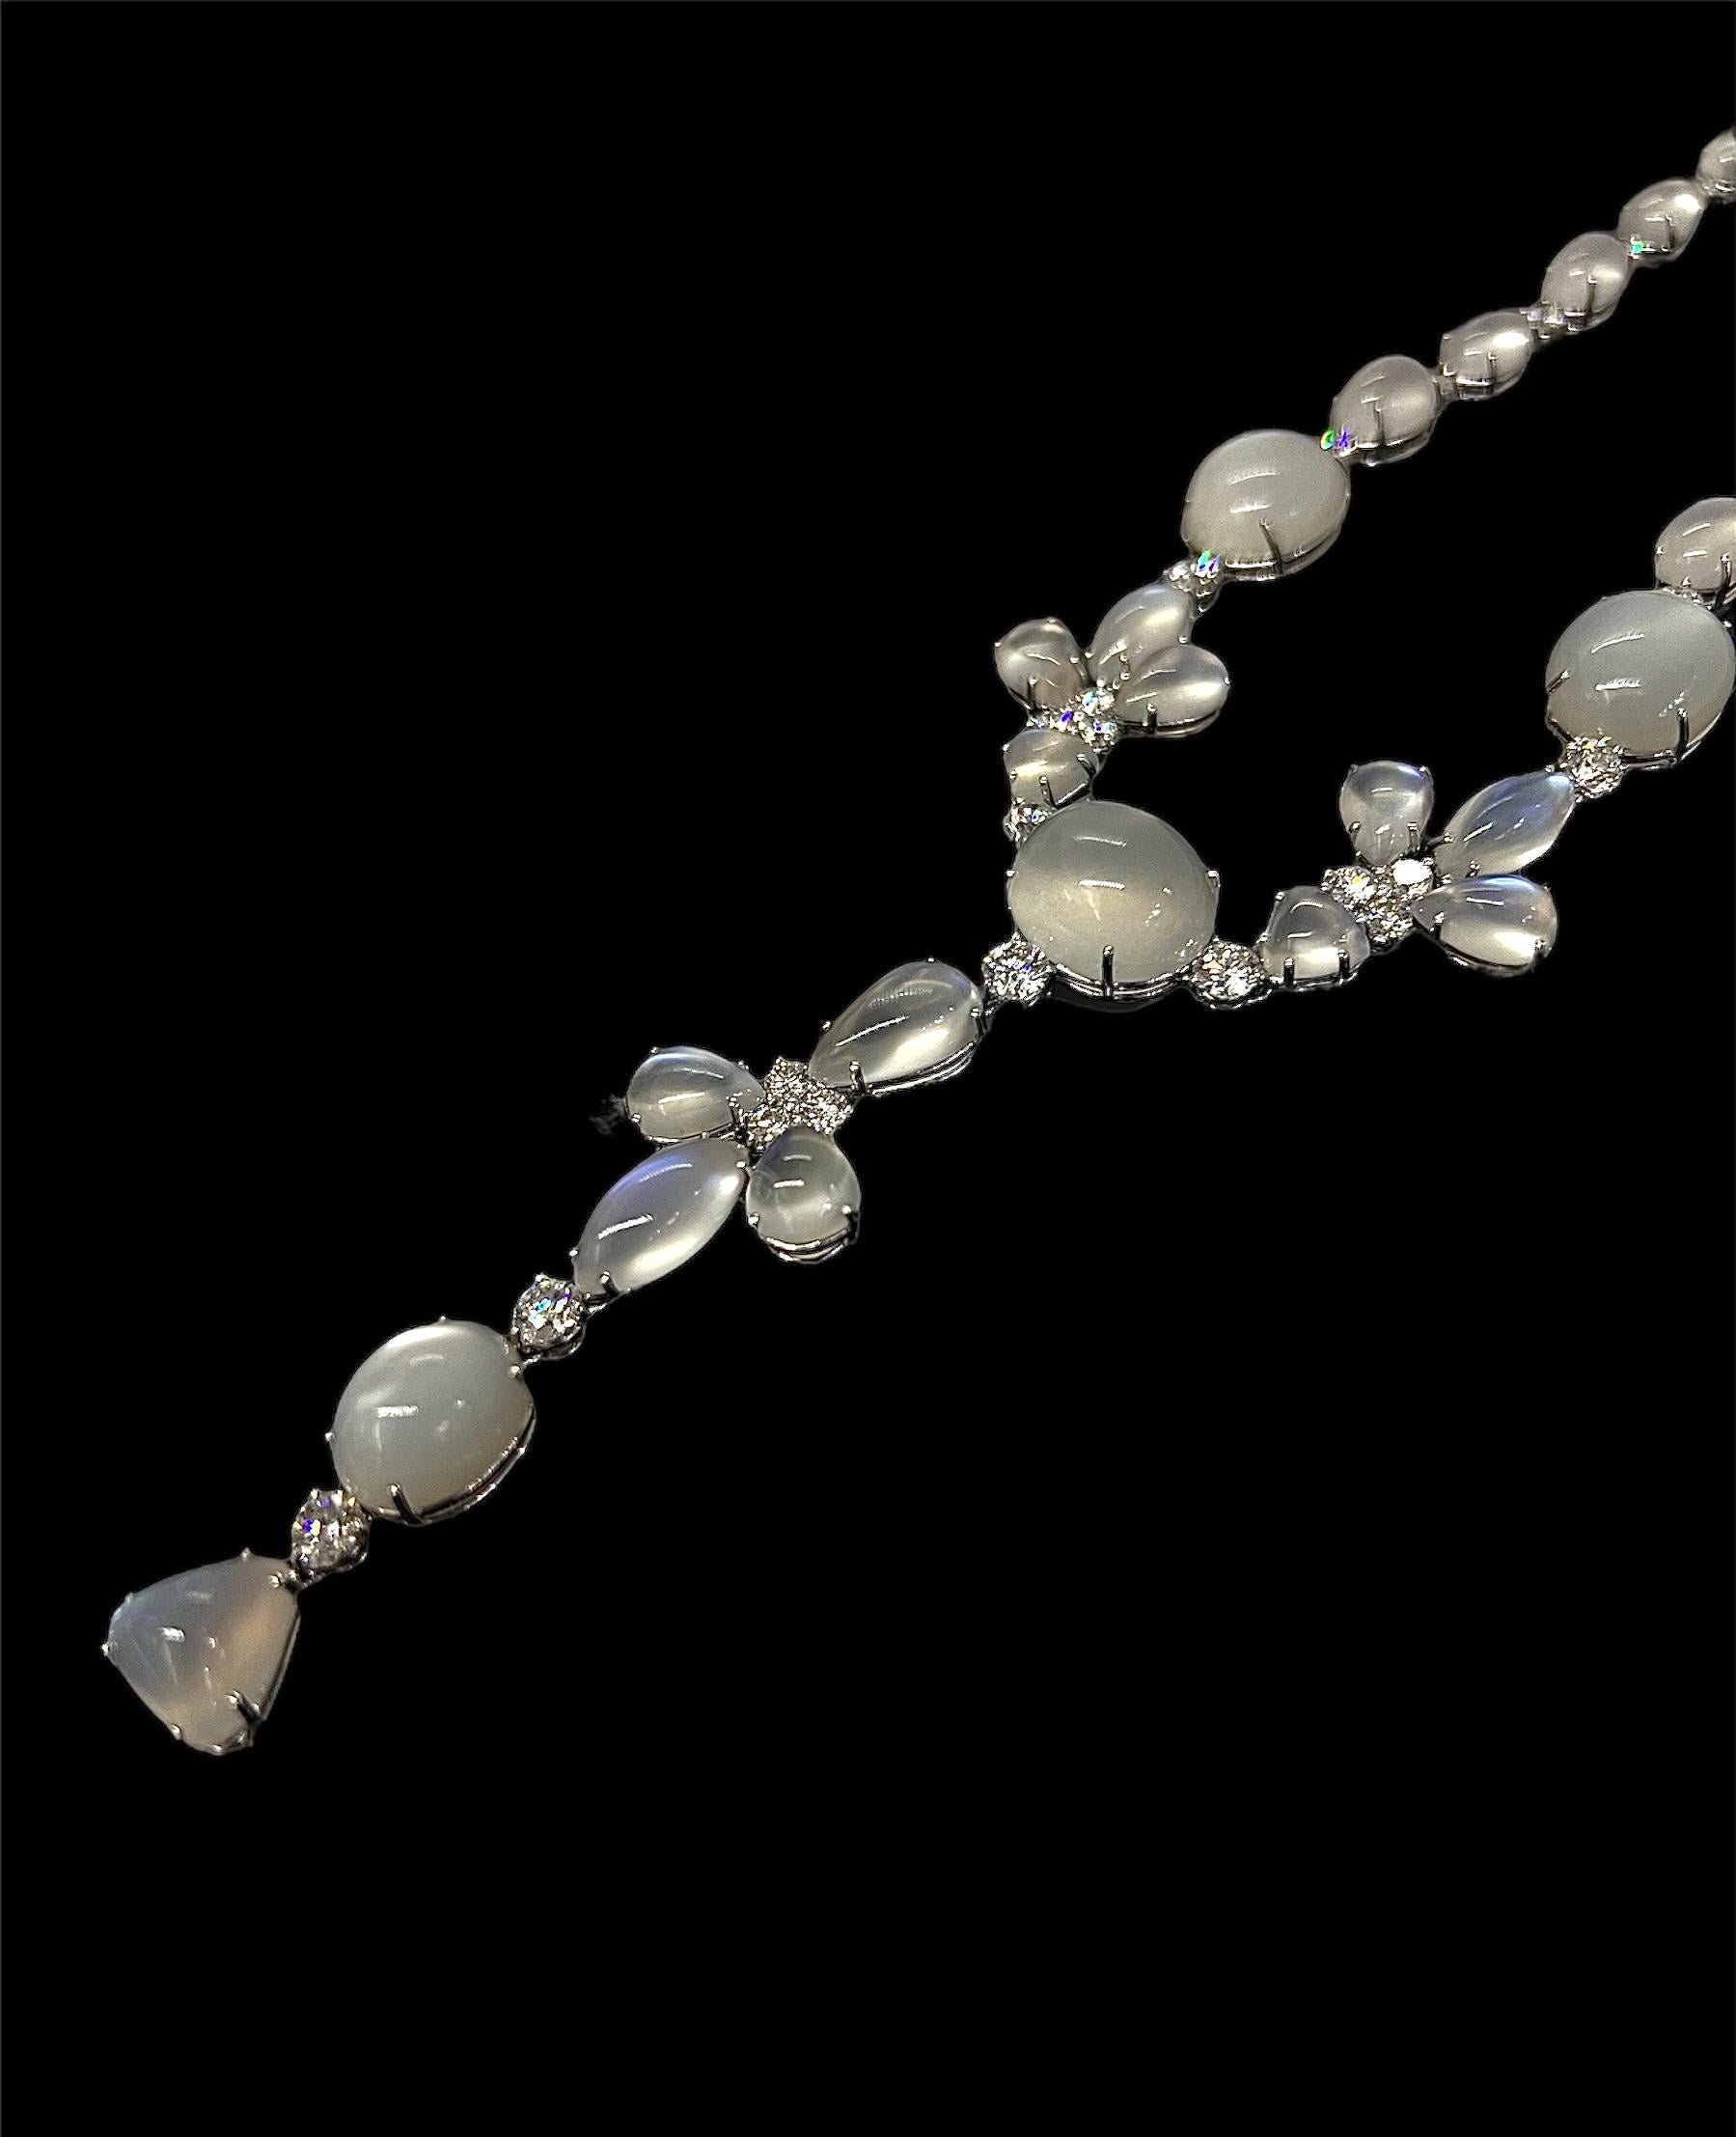 Sophia D. necklace set in platinum with 86.32 carats moonstone. 

Sophia D by Joseph Dardashti LTD has been known worldwide for 35 years and are inspired by classic Art Deco design that merges with modern manufacturing techniques.